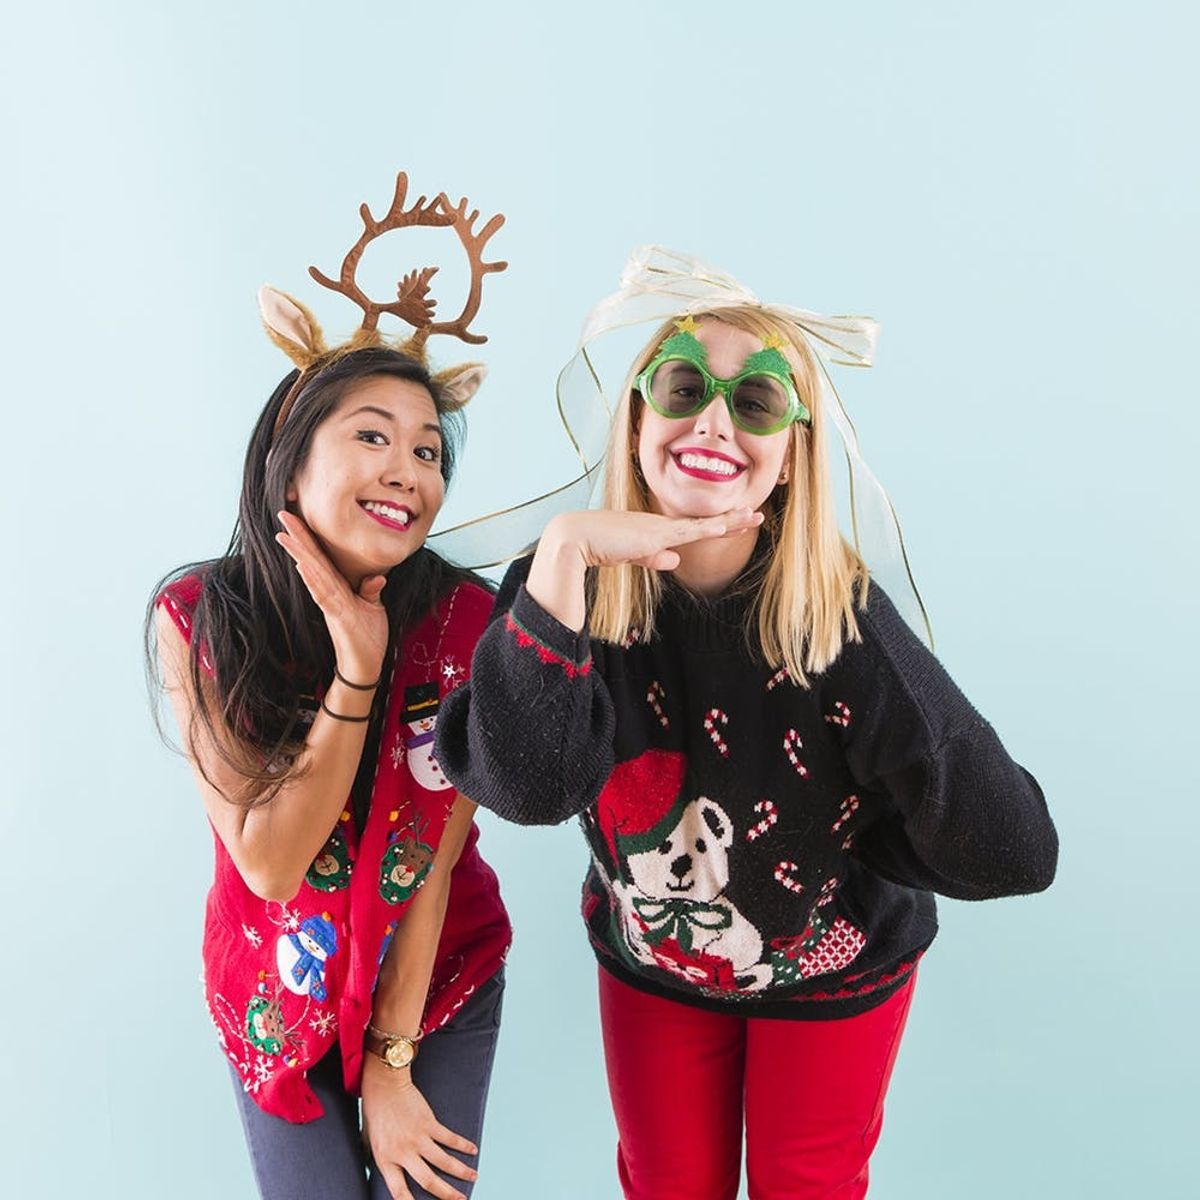 How Your Tacky Sweater Could Snag You a Sweet Shopping Spree